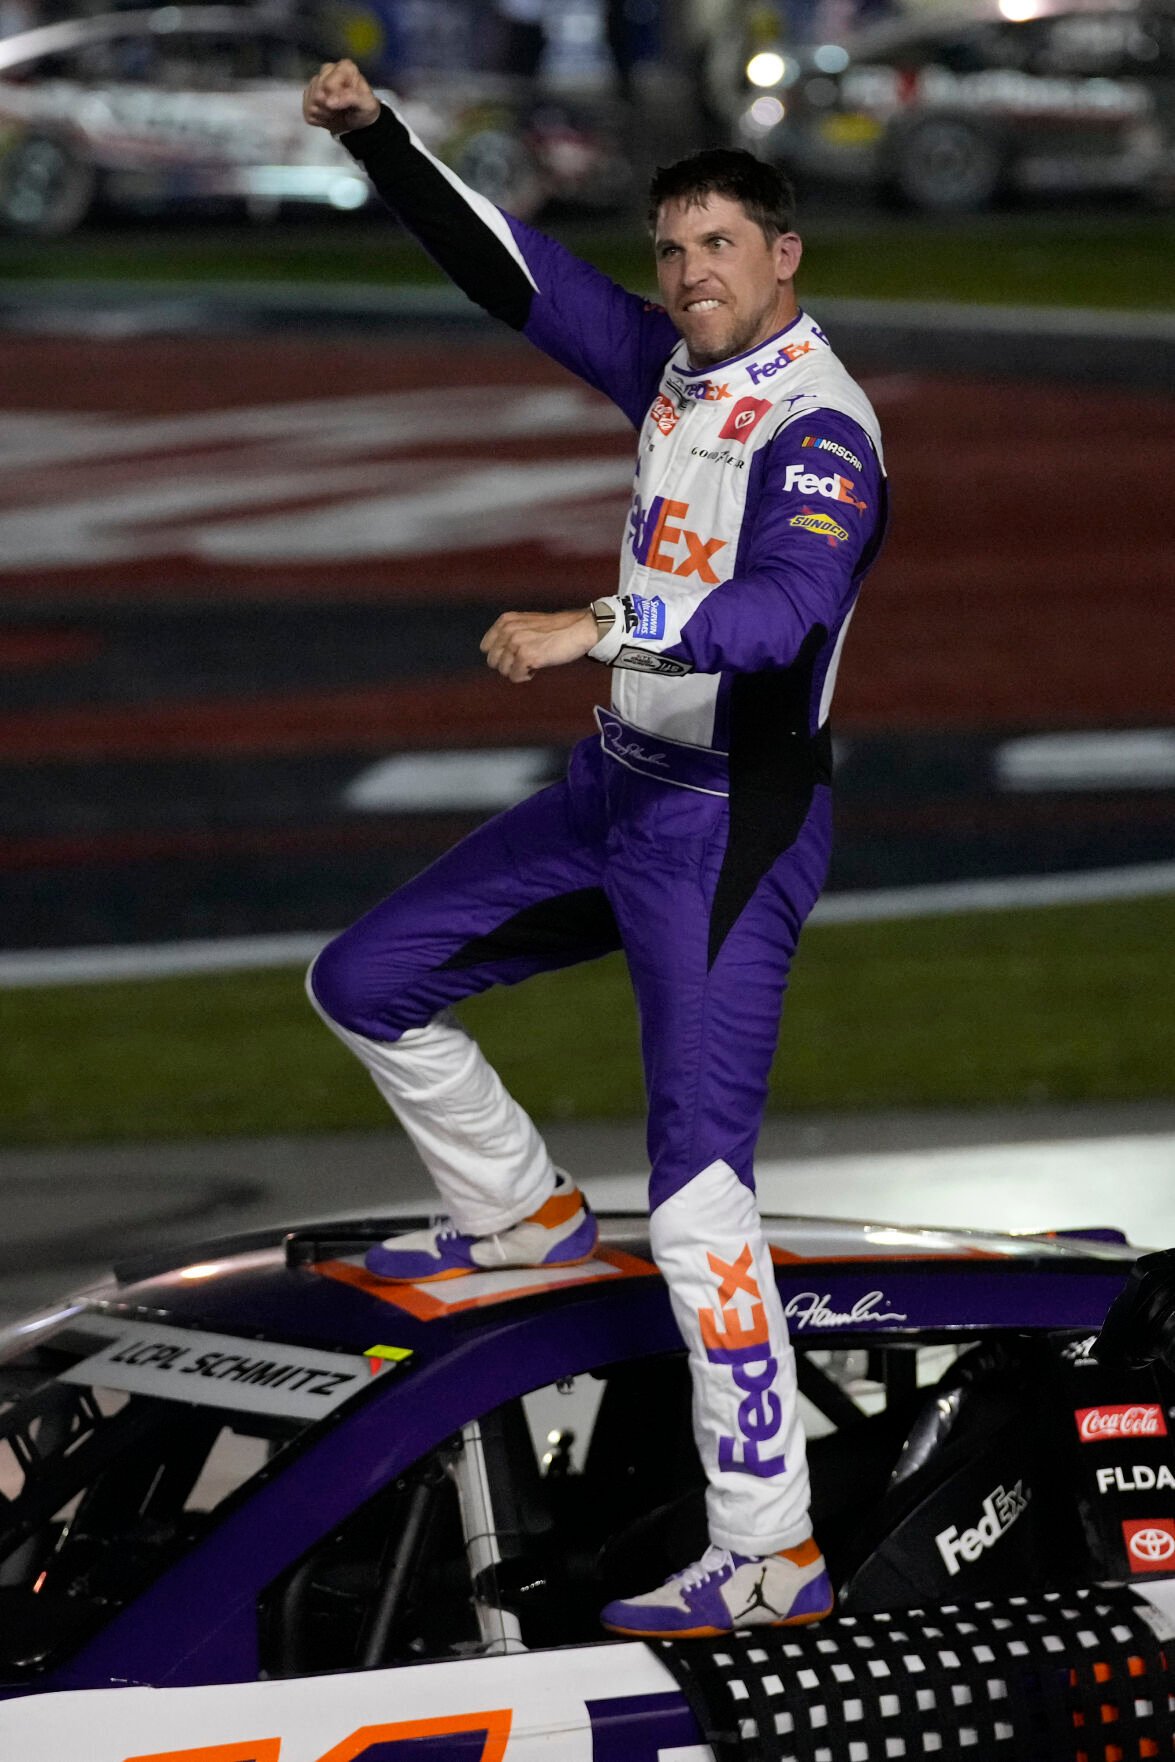 NASCAR Wallpapers on Twitter Denny Hamlin 2015 pts Denny hasnt won a  race yet this season but he led the points for much of the year and won 5  stages to get